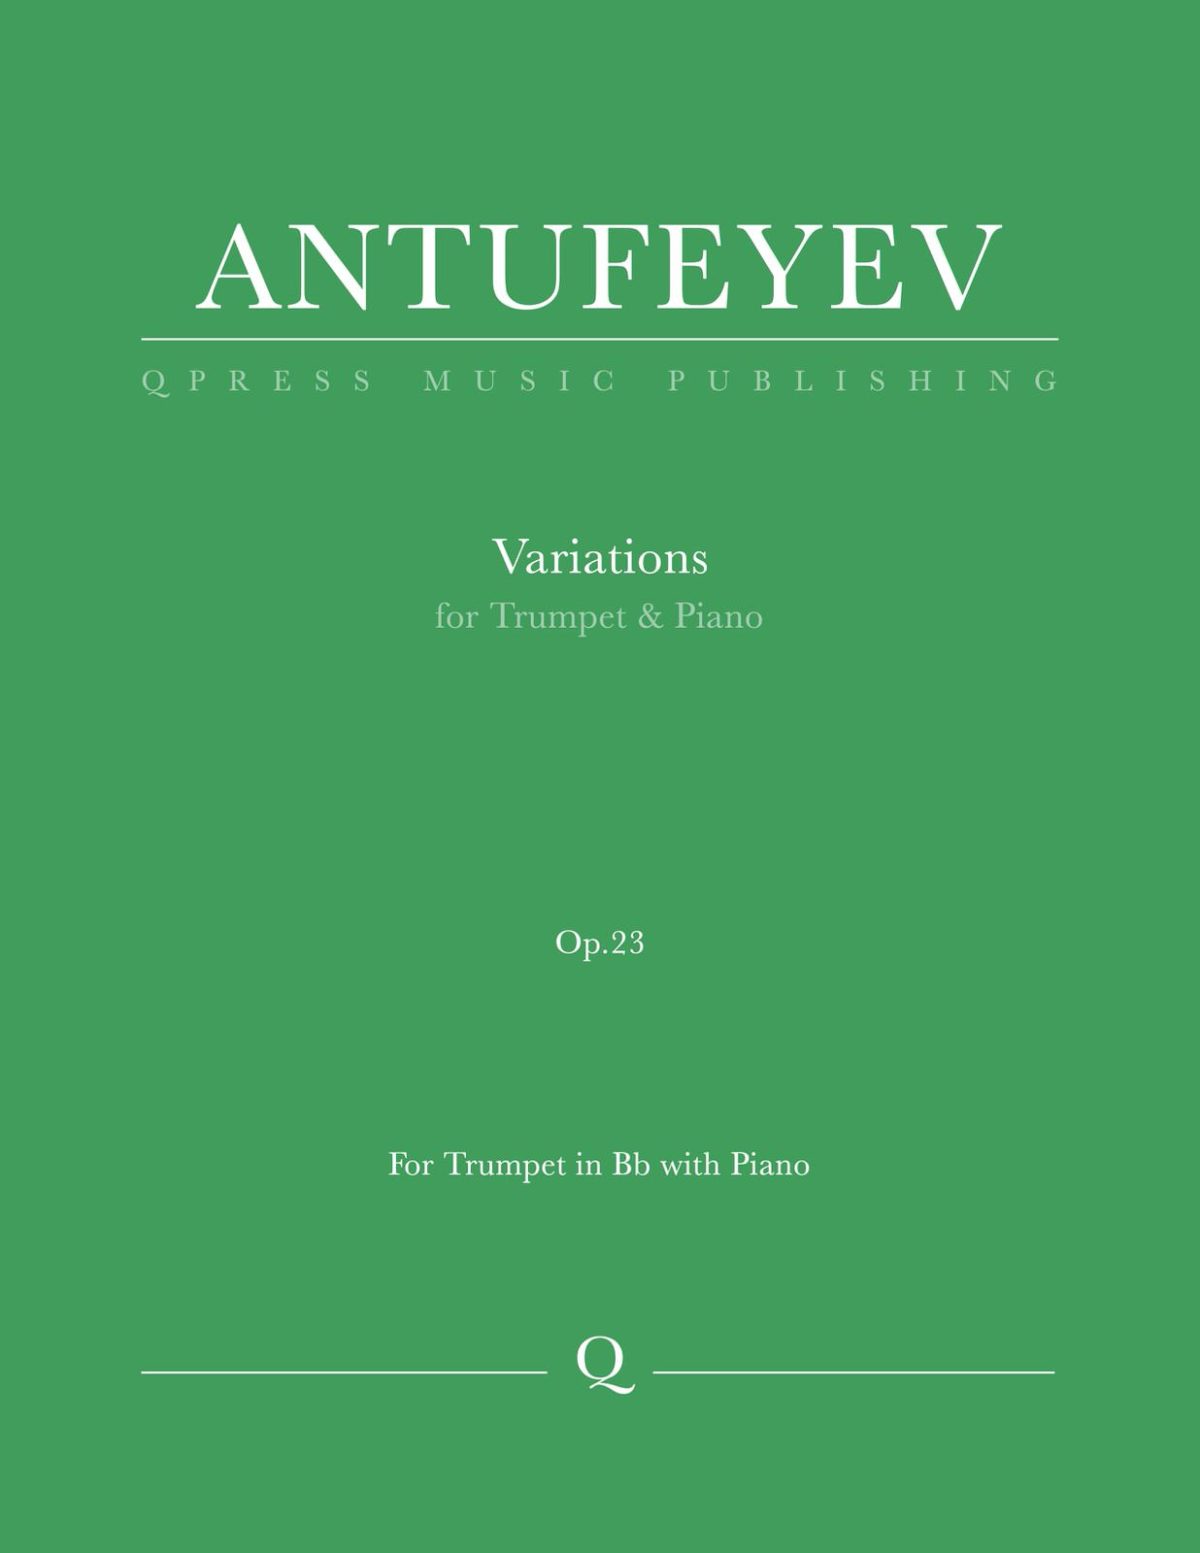 Antufeyev, Boris, Variations for Trumpet and Piano-p01